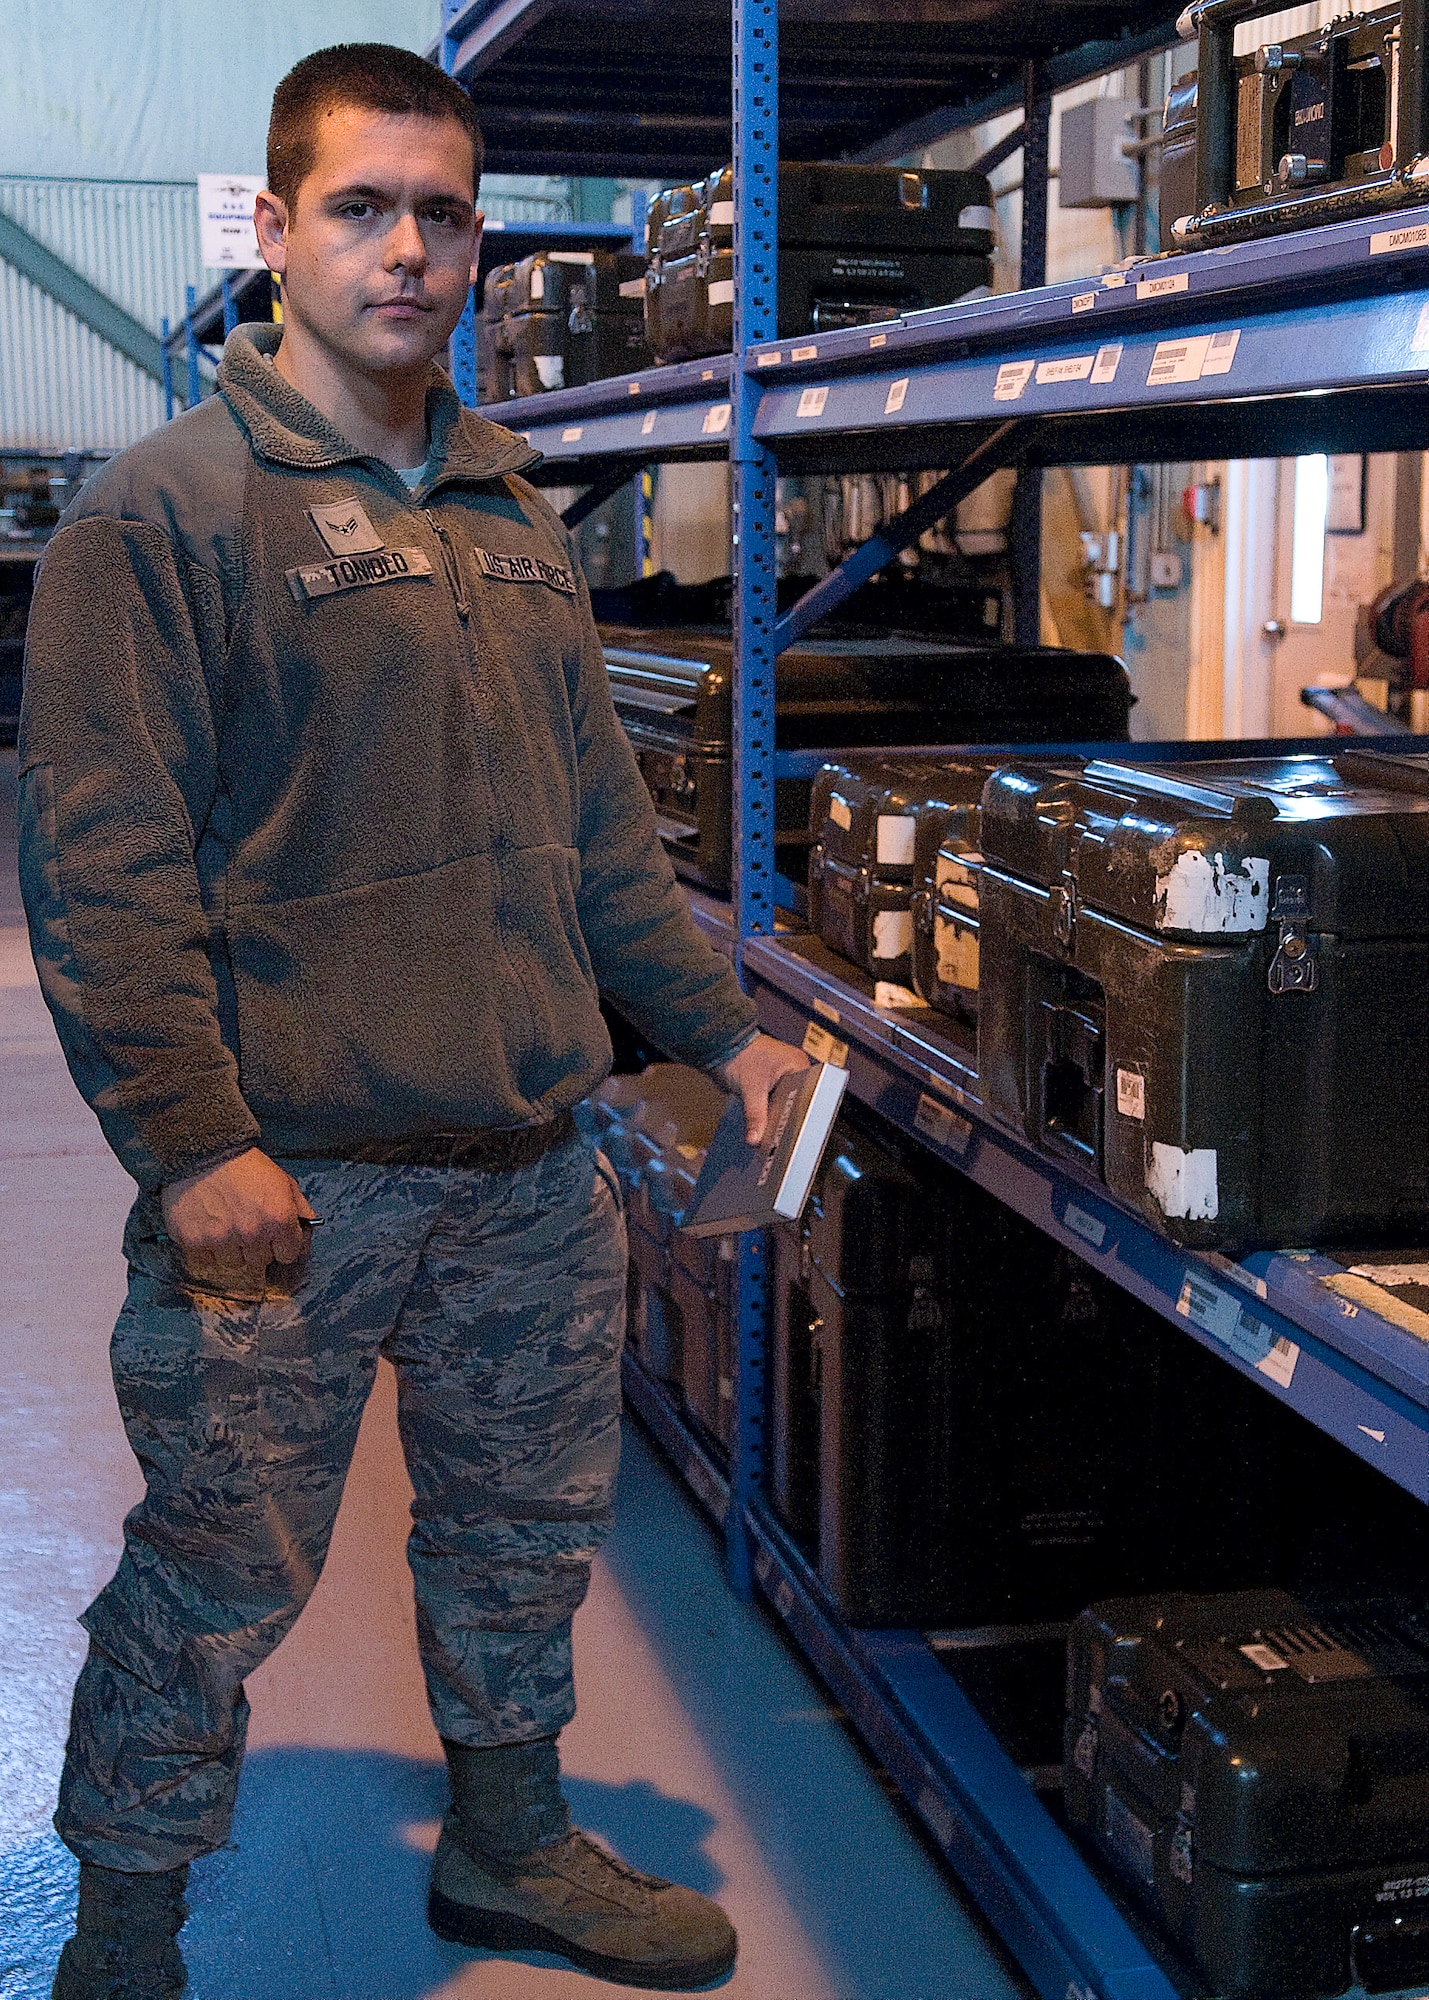 Airman 1st Class Austin Toniolo, 736th Aircraft Maintenance Squadron Composite Tool Kit support technician, poses in his work center Oct. 24, 2013, at Dover Air Force Base, Del. Toniolo is in charge of all the tools and equipment that are used on the C-17 Globemaster III’s systems. (U.S. Air Force photo/Airman 1st Class Ashlin Federick)